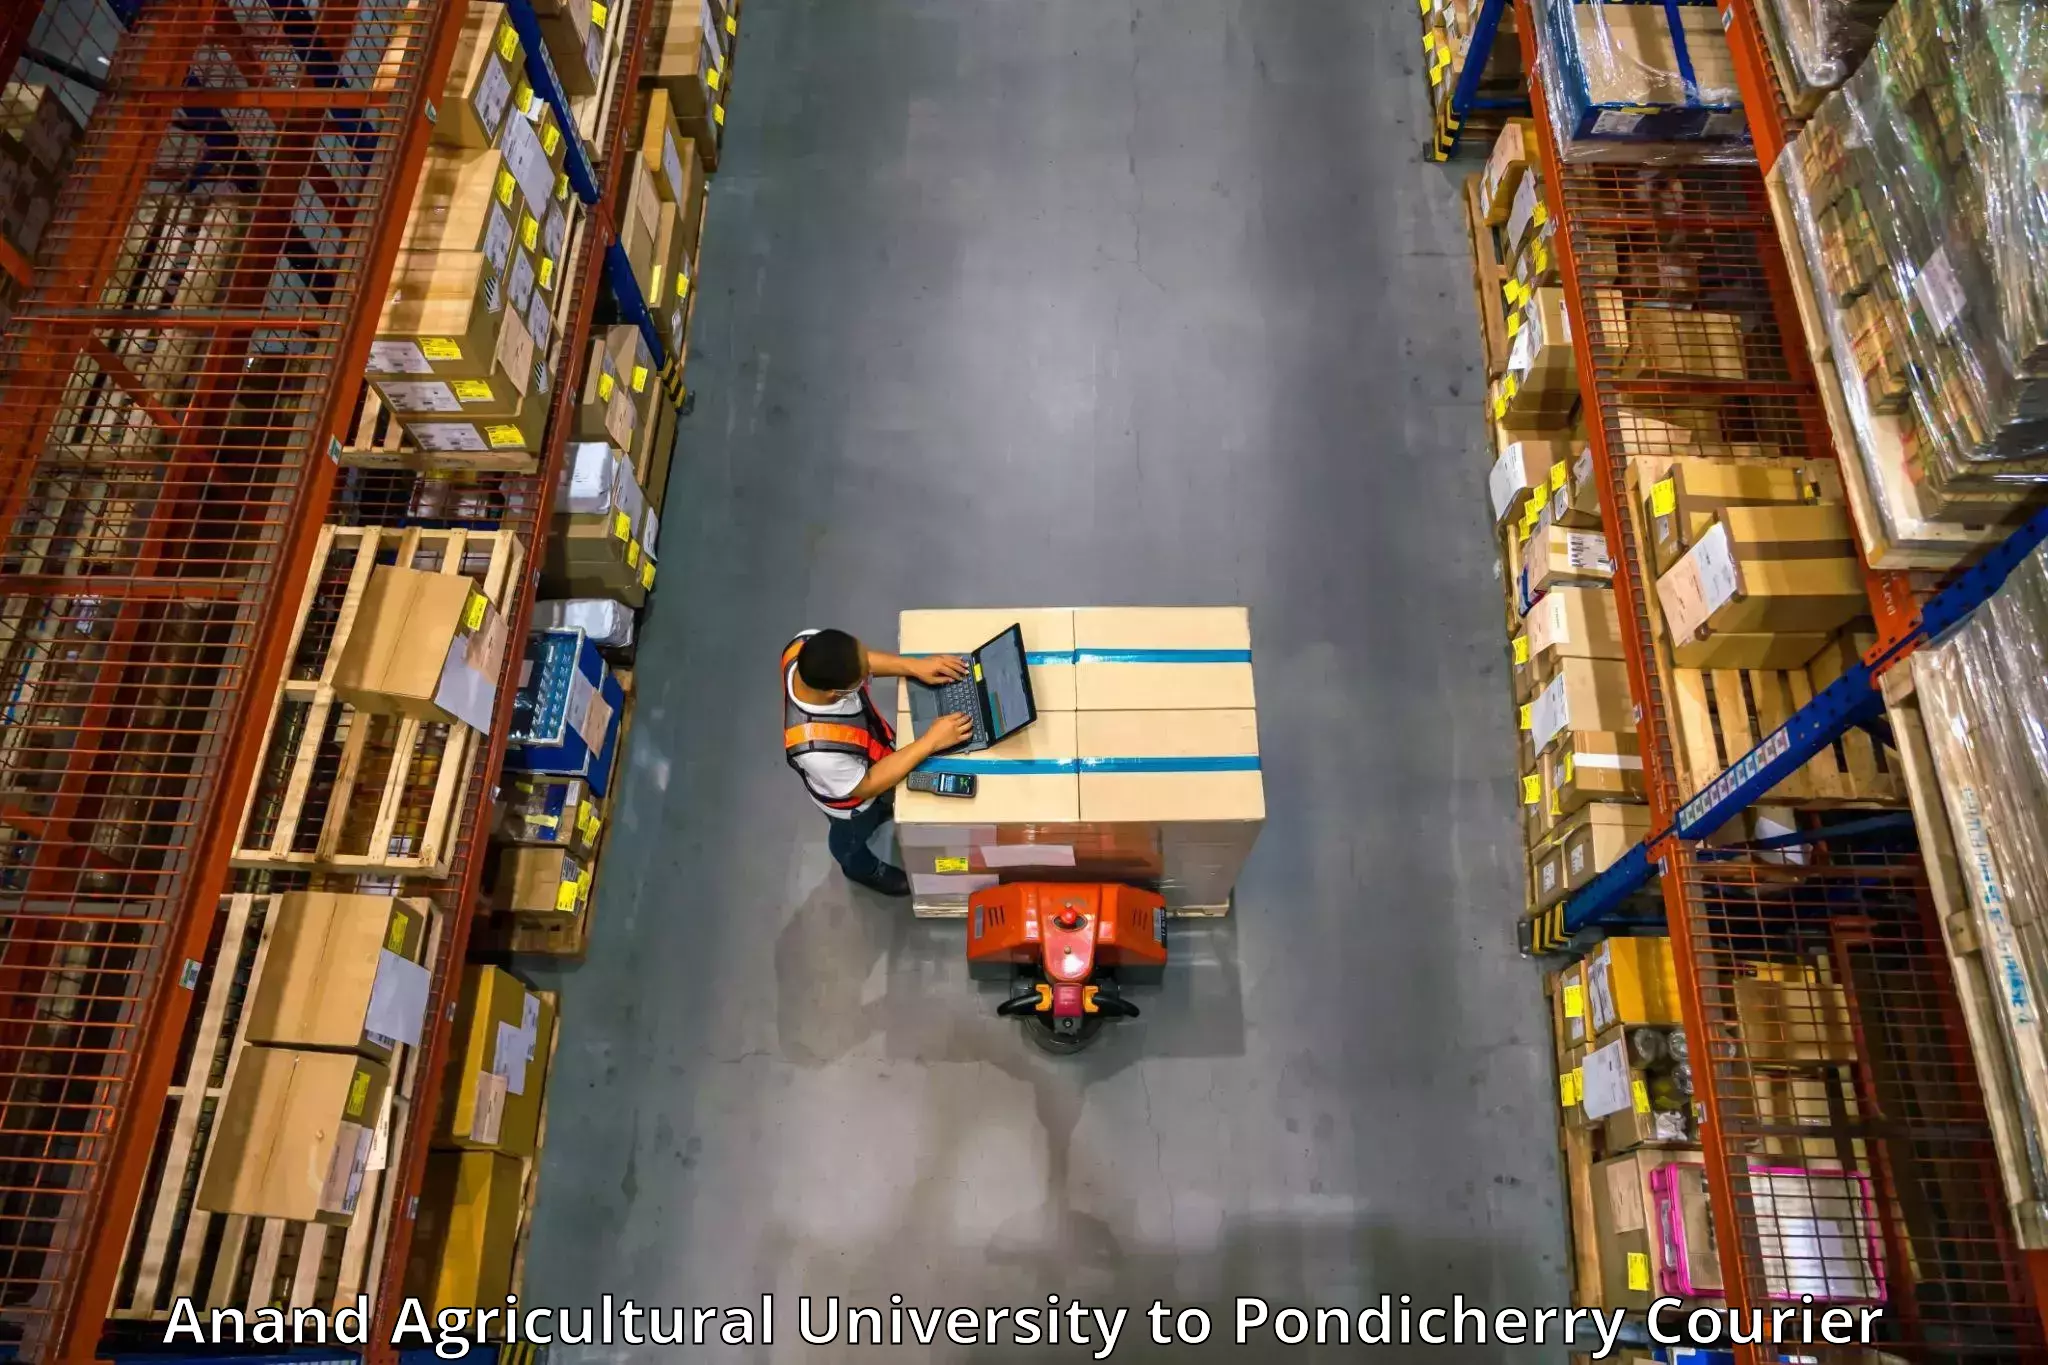 Comprehensive goods transport Anand Agricultural University to Pondicherry University